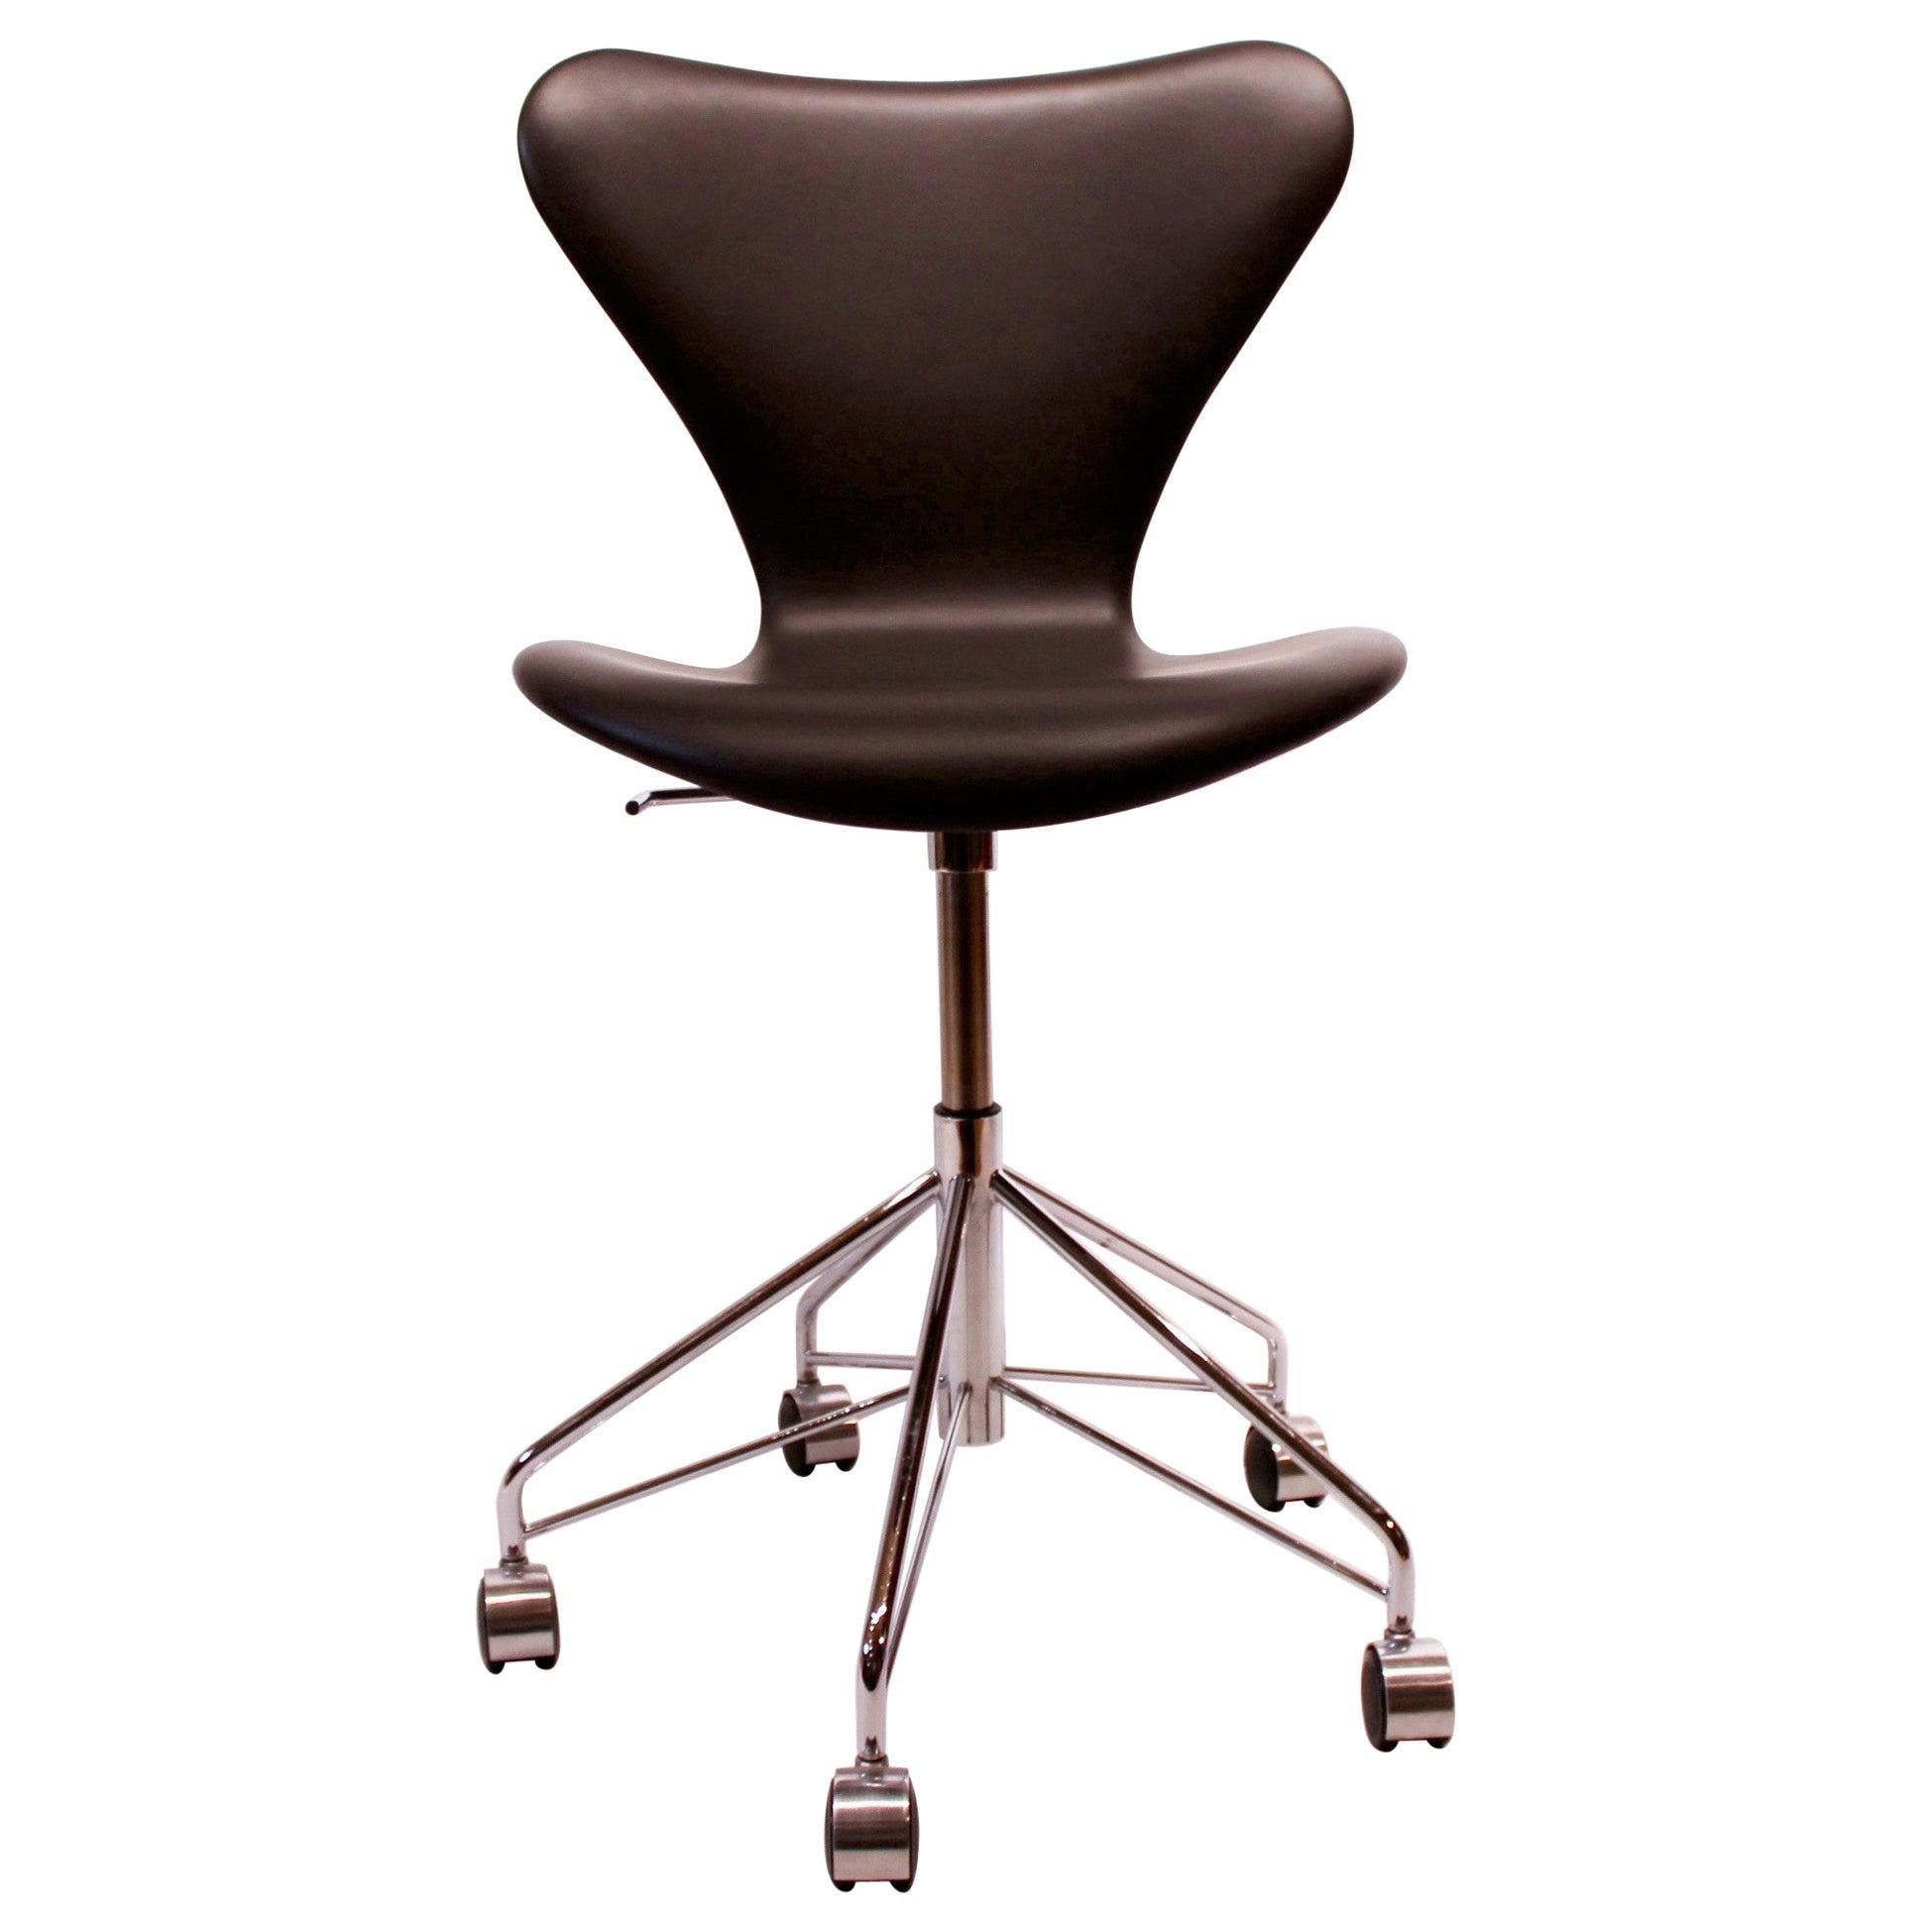 Black Leather Seven Office Chair, Model 3117, by Arne Jacobsen and Fritz Hansen